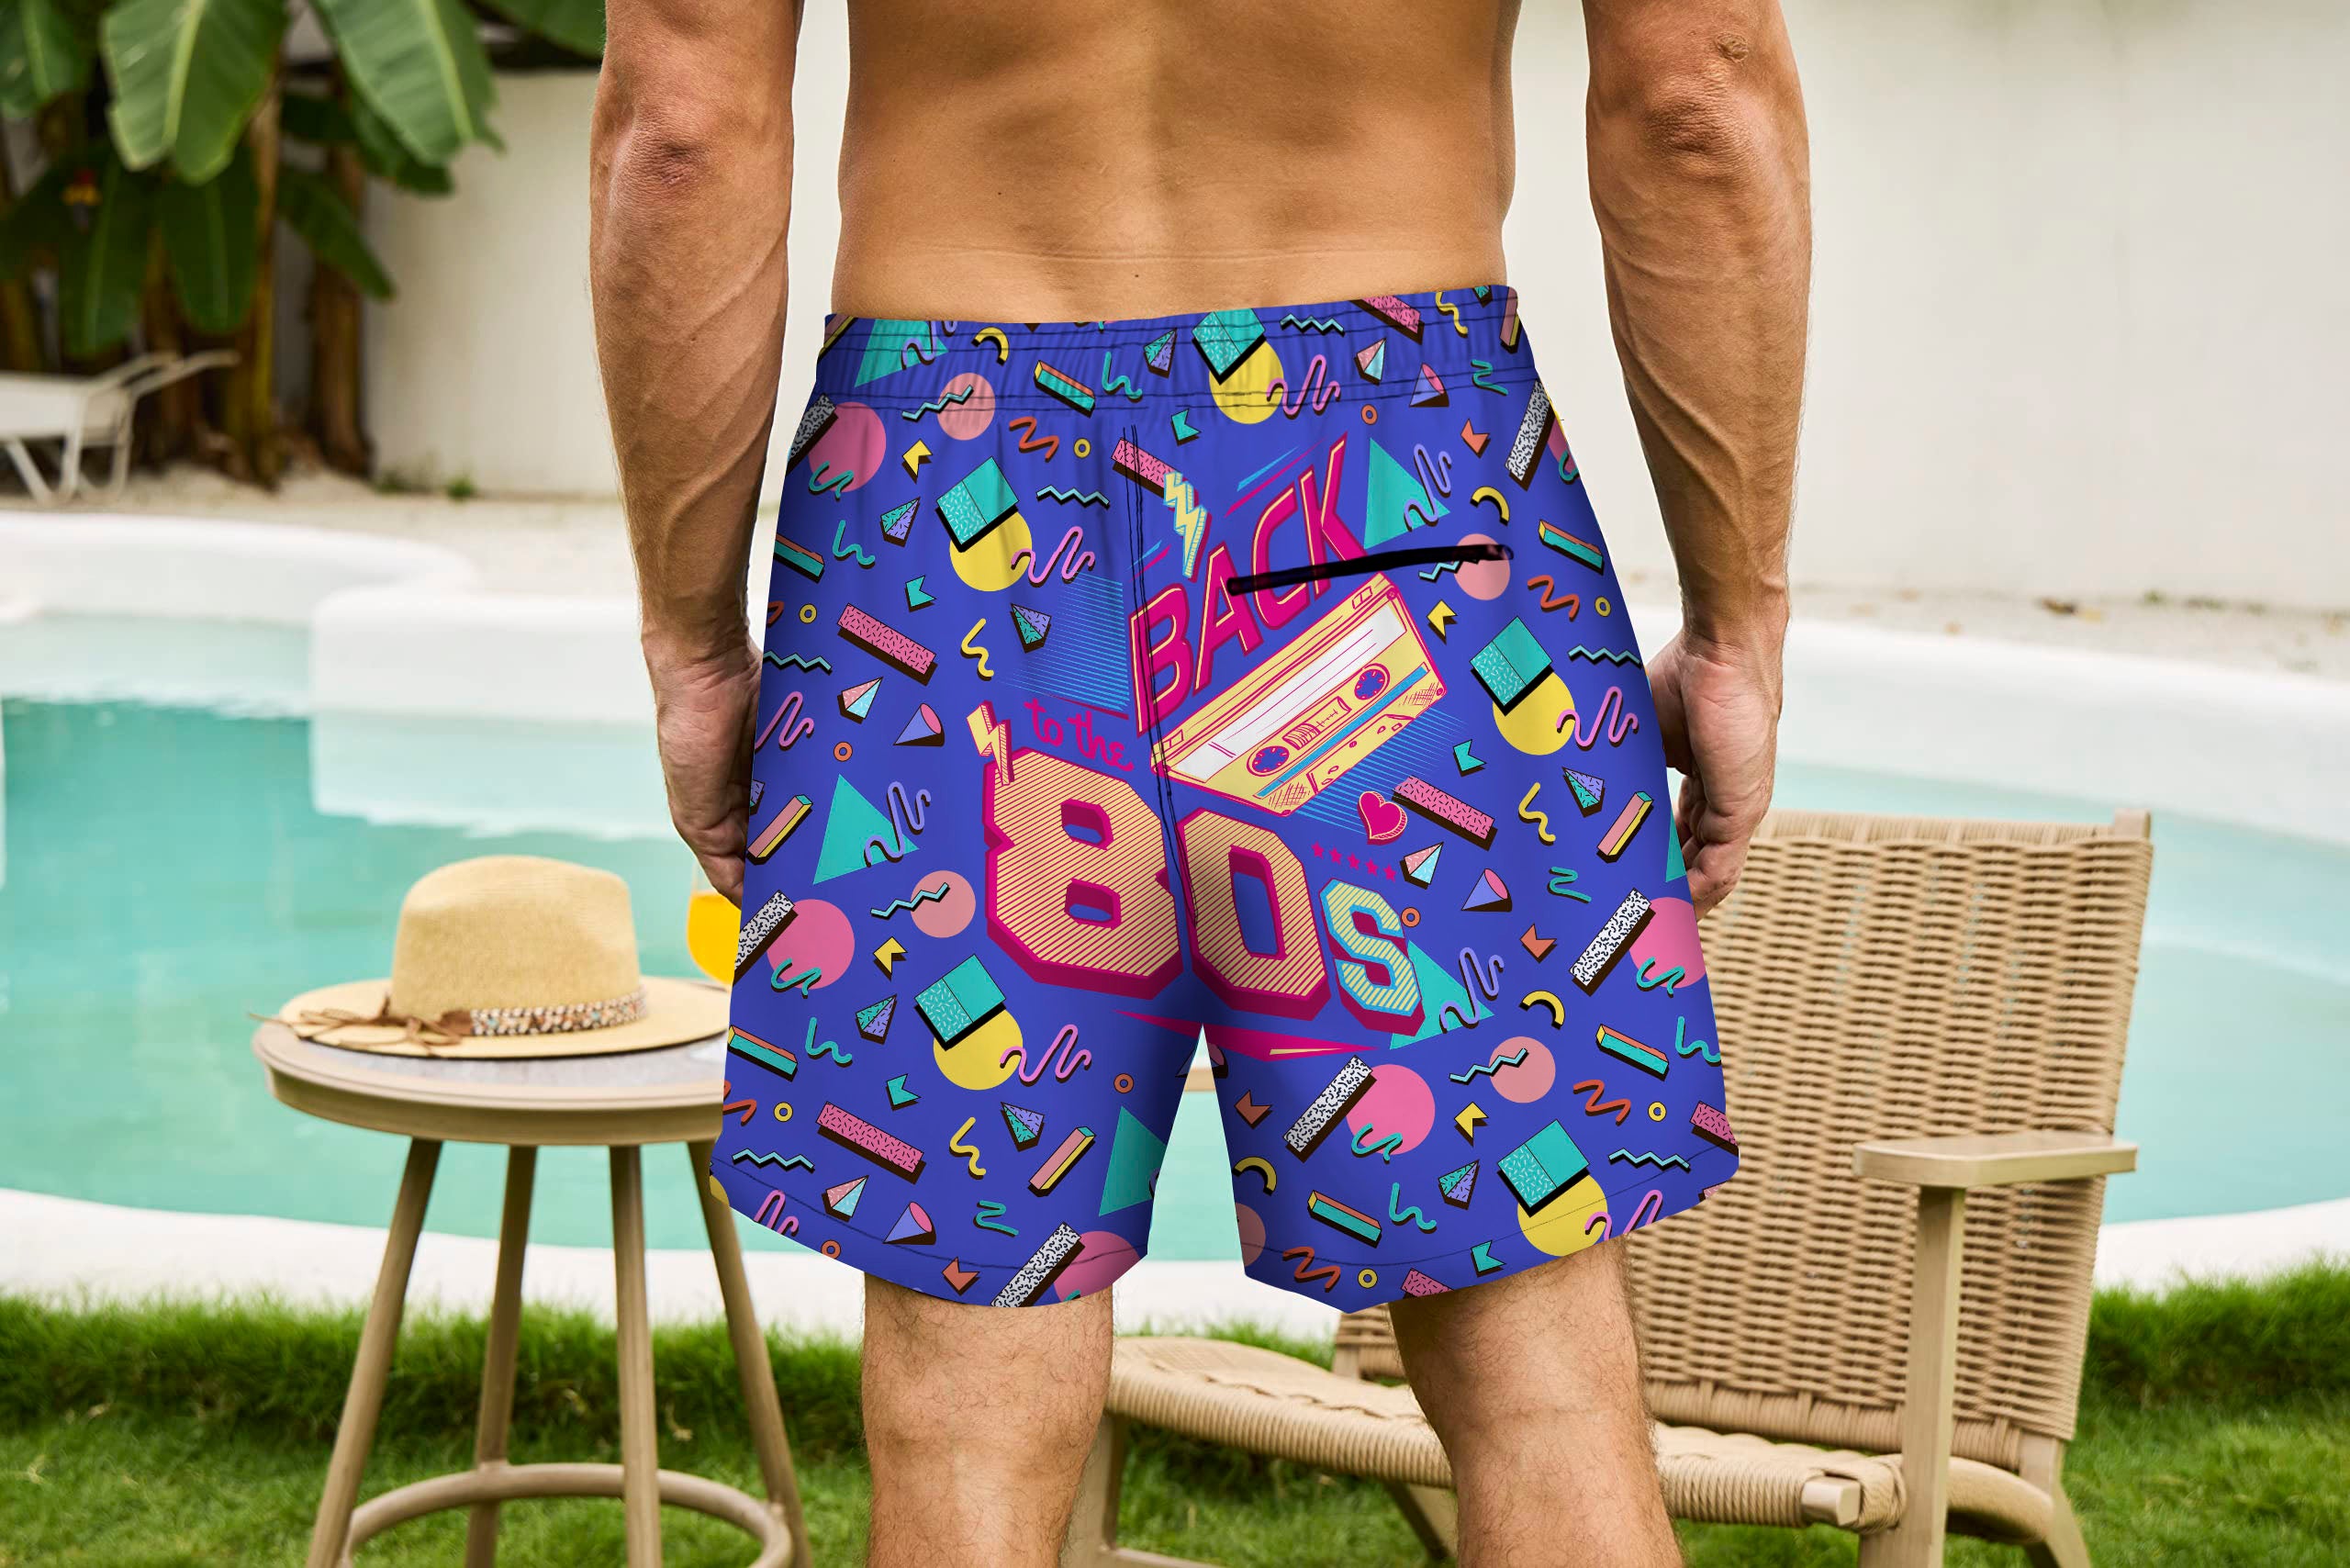 Men's Swim Trunks With Compression Liner 5.5" Inseam Quick Dry Swim Shorts With Pockets - 80's Style